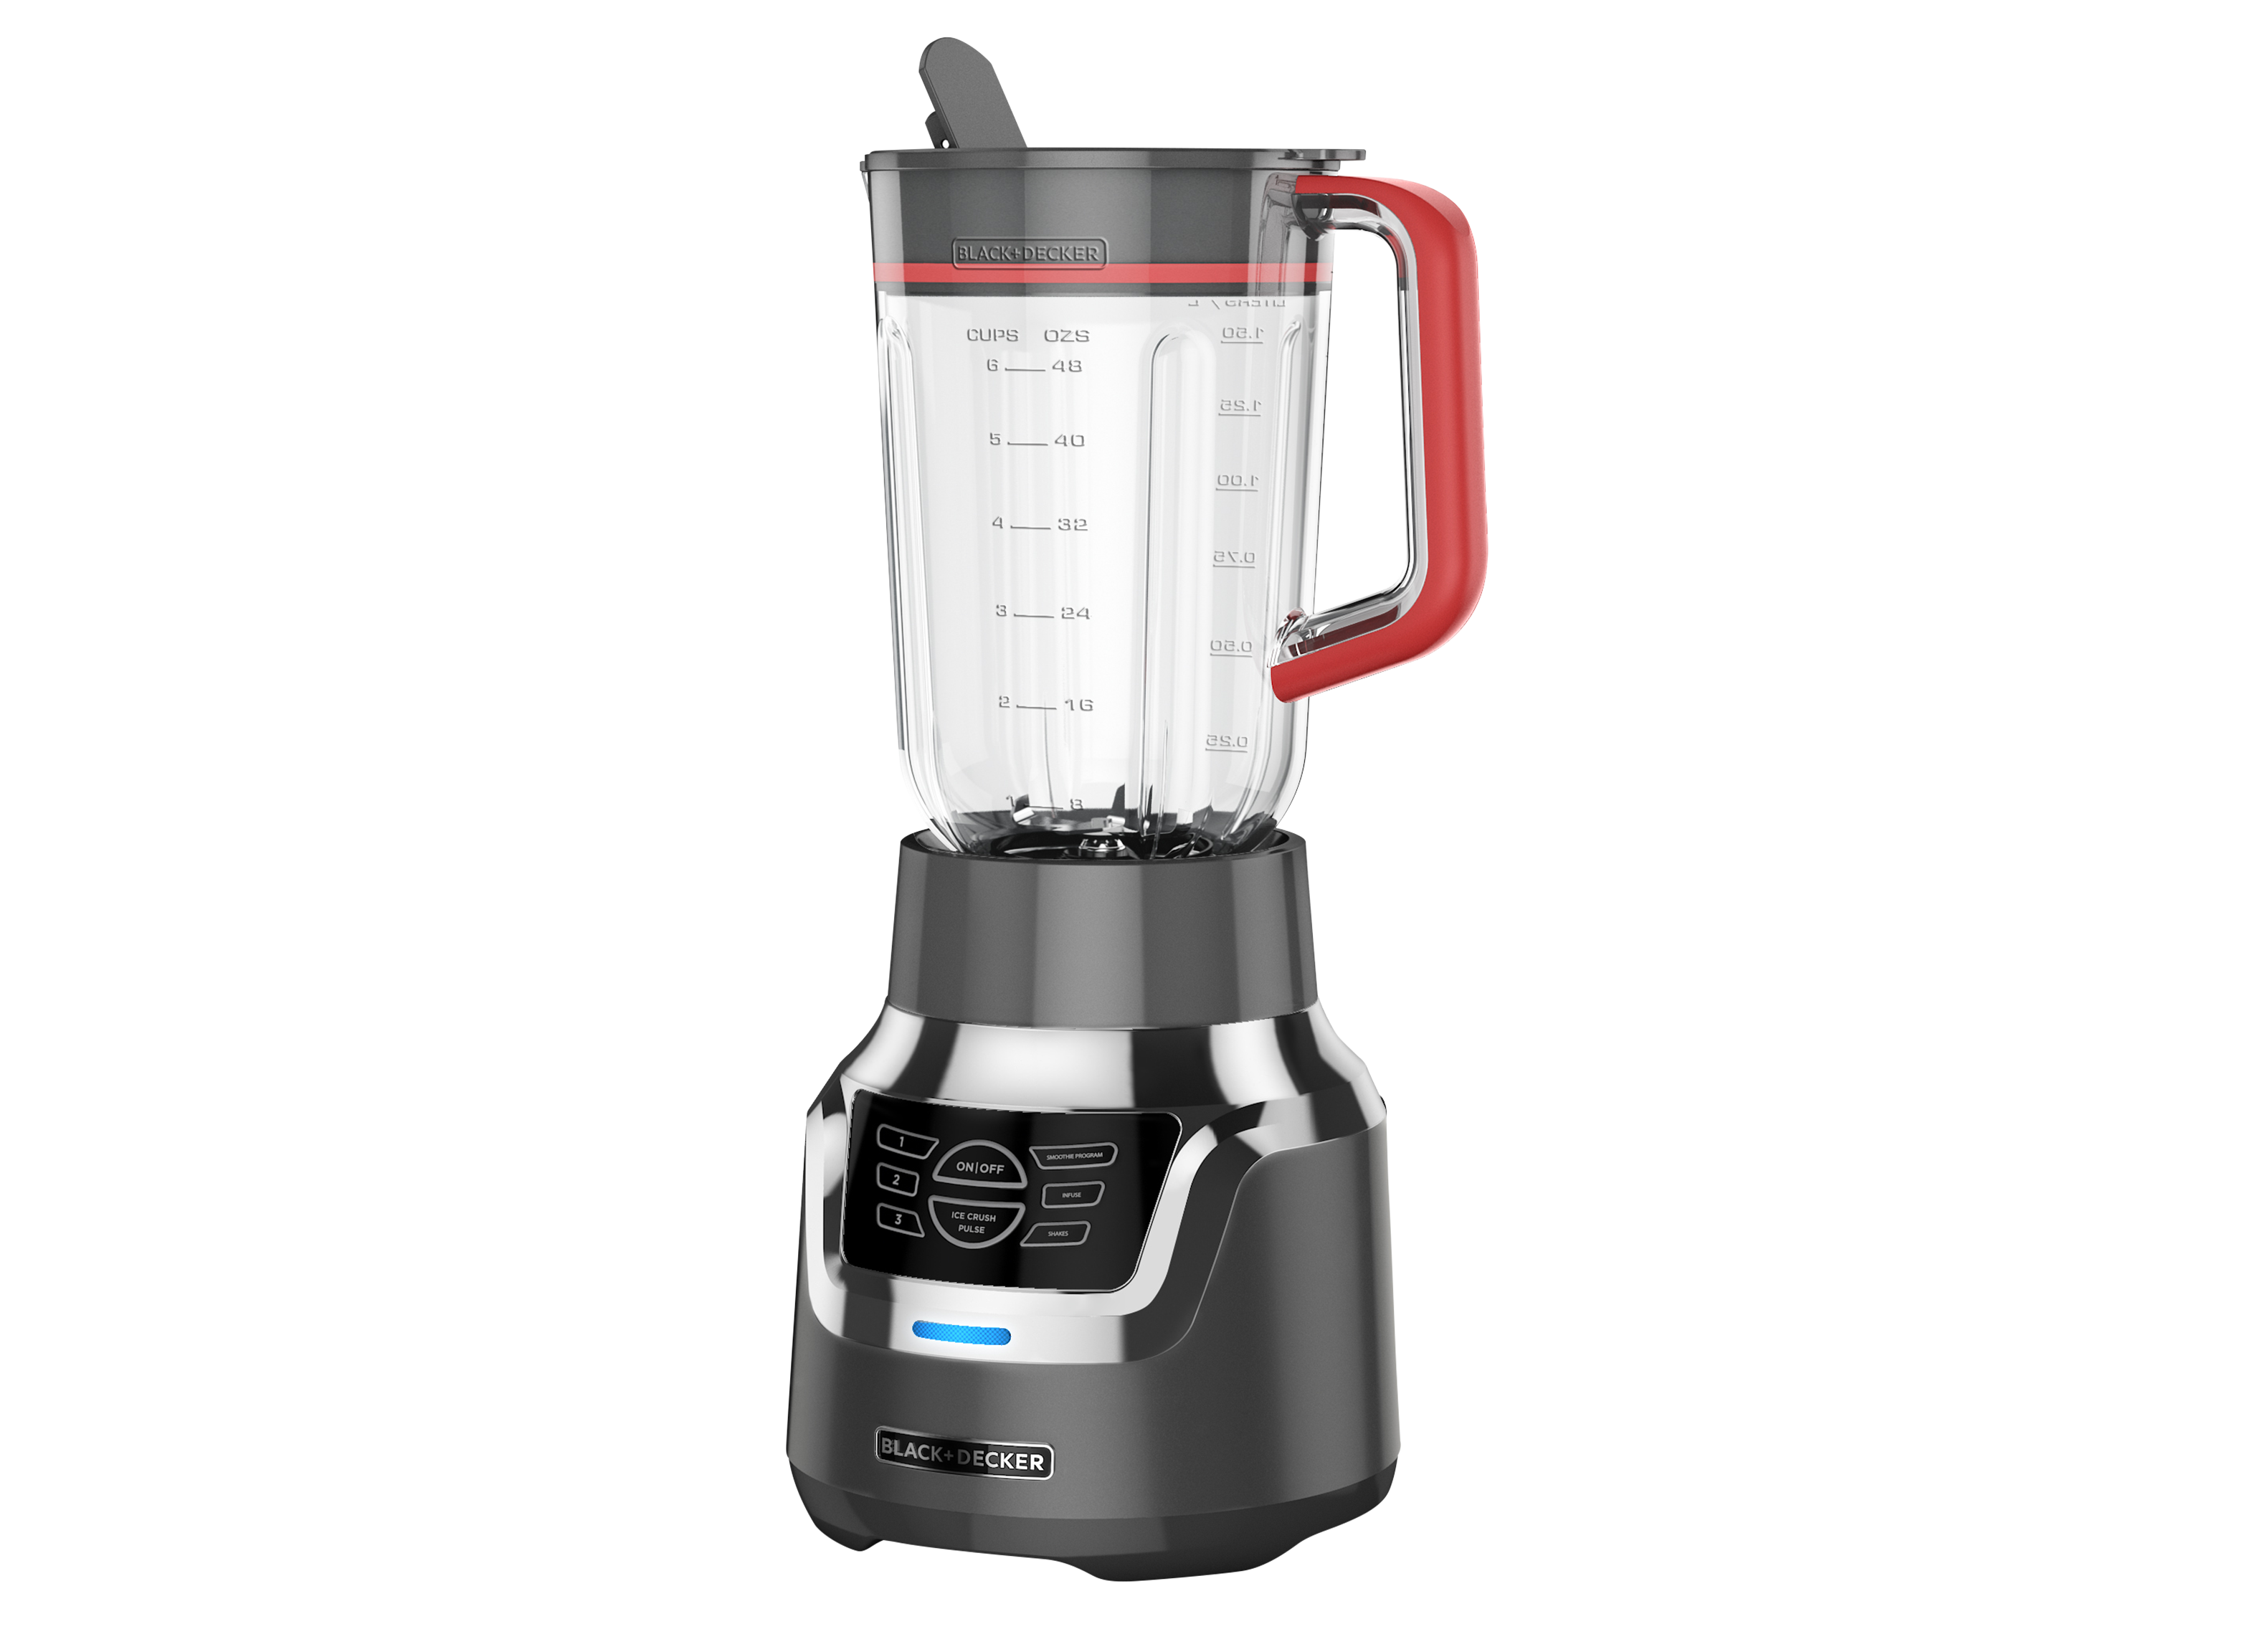 https://crdms.images.consumerreports.org/prod/products/cr/models/395890-personal-blender-black-decker-3-in-1-digital-power-crush-bl1350dp-p-personal-62329.png